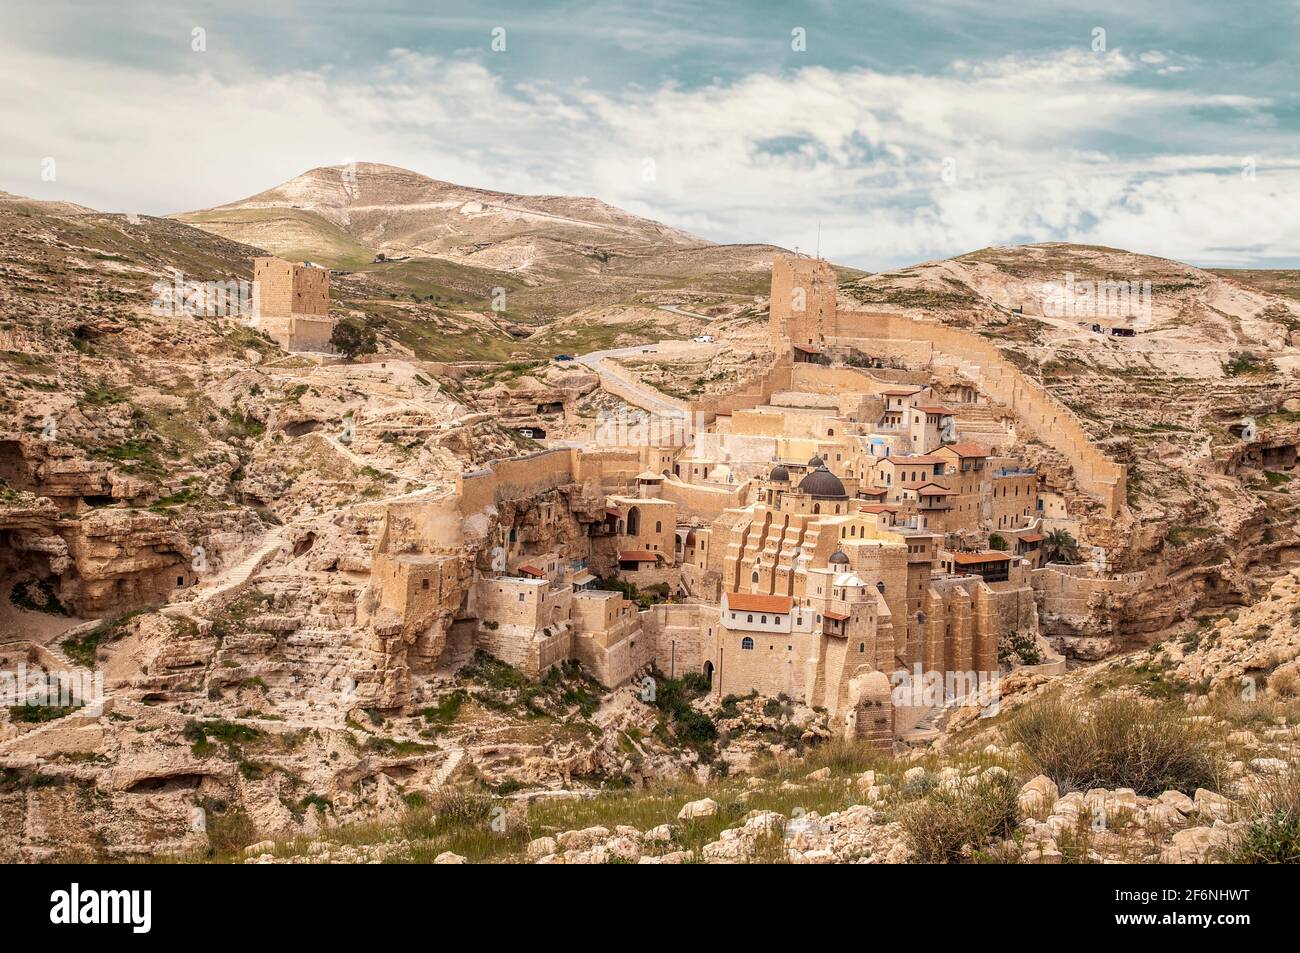 The Holy Lavra of Saint Sabbas, known in Syriac as Mar Saba [Marsaba] is a Greek Orthodox monastery overlooking the Kidron Valley at a point halfway b Stock Photo